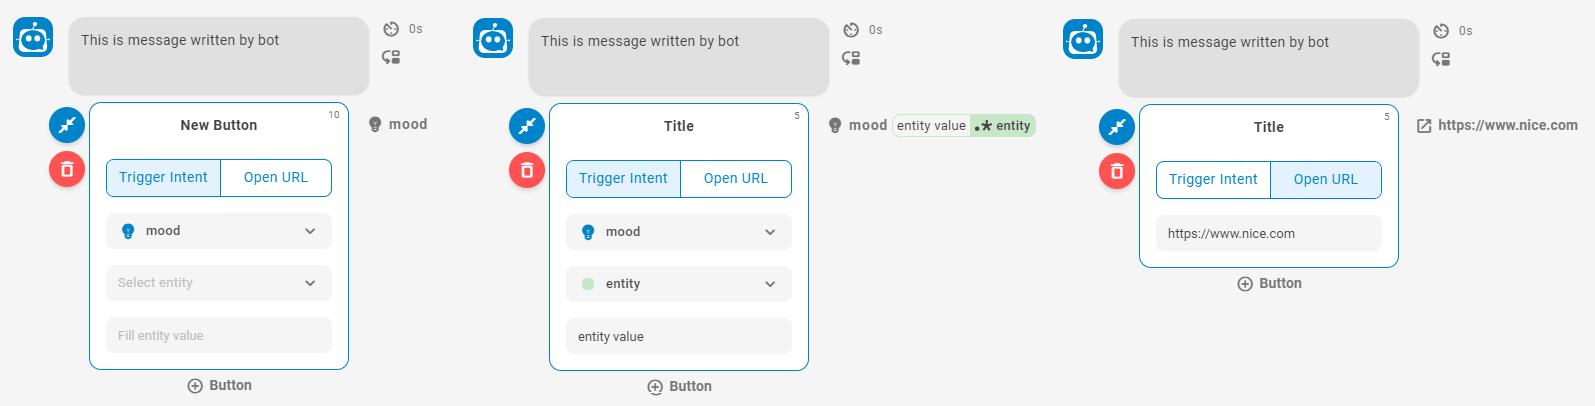 the output of the sendButtons method example